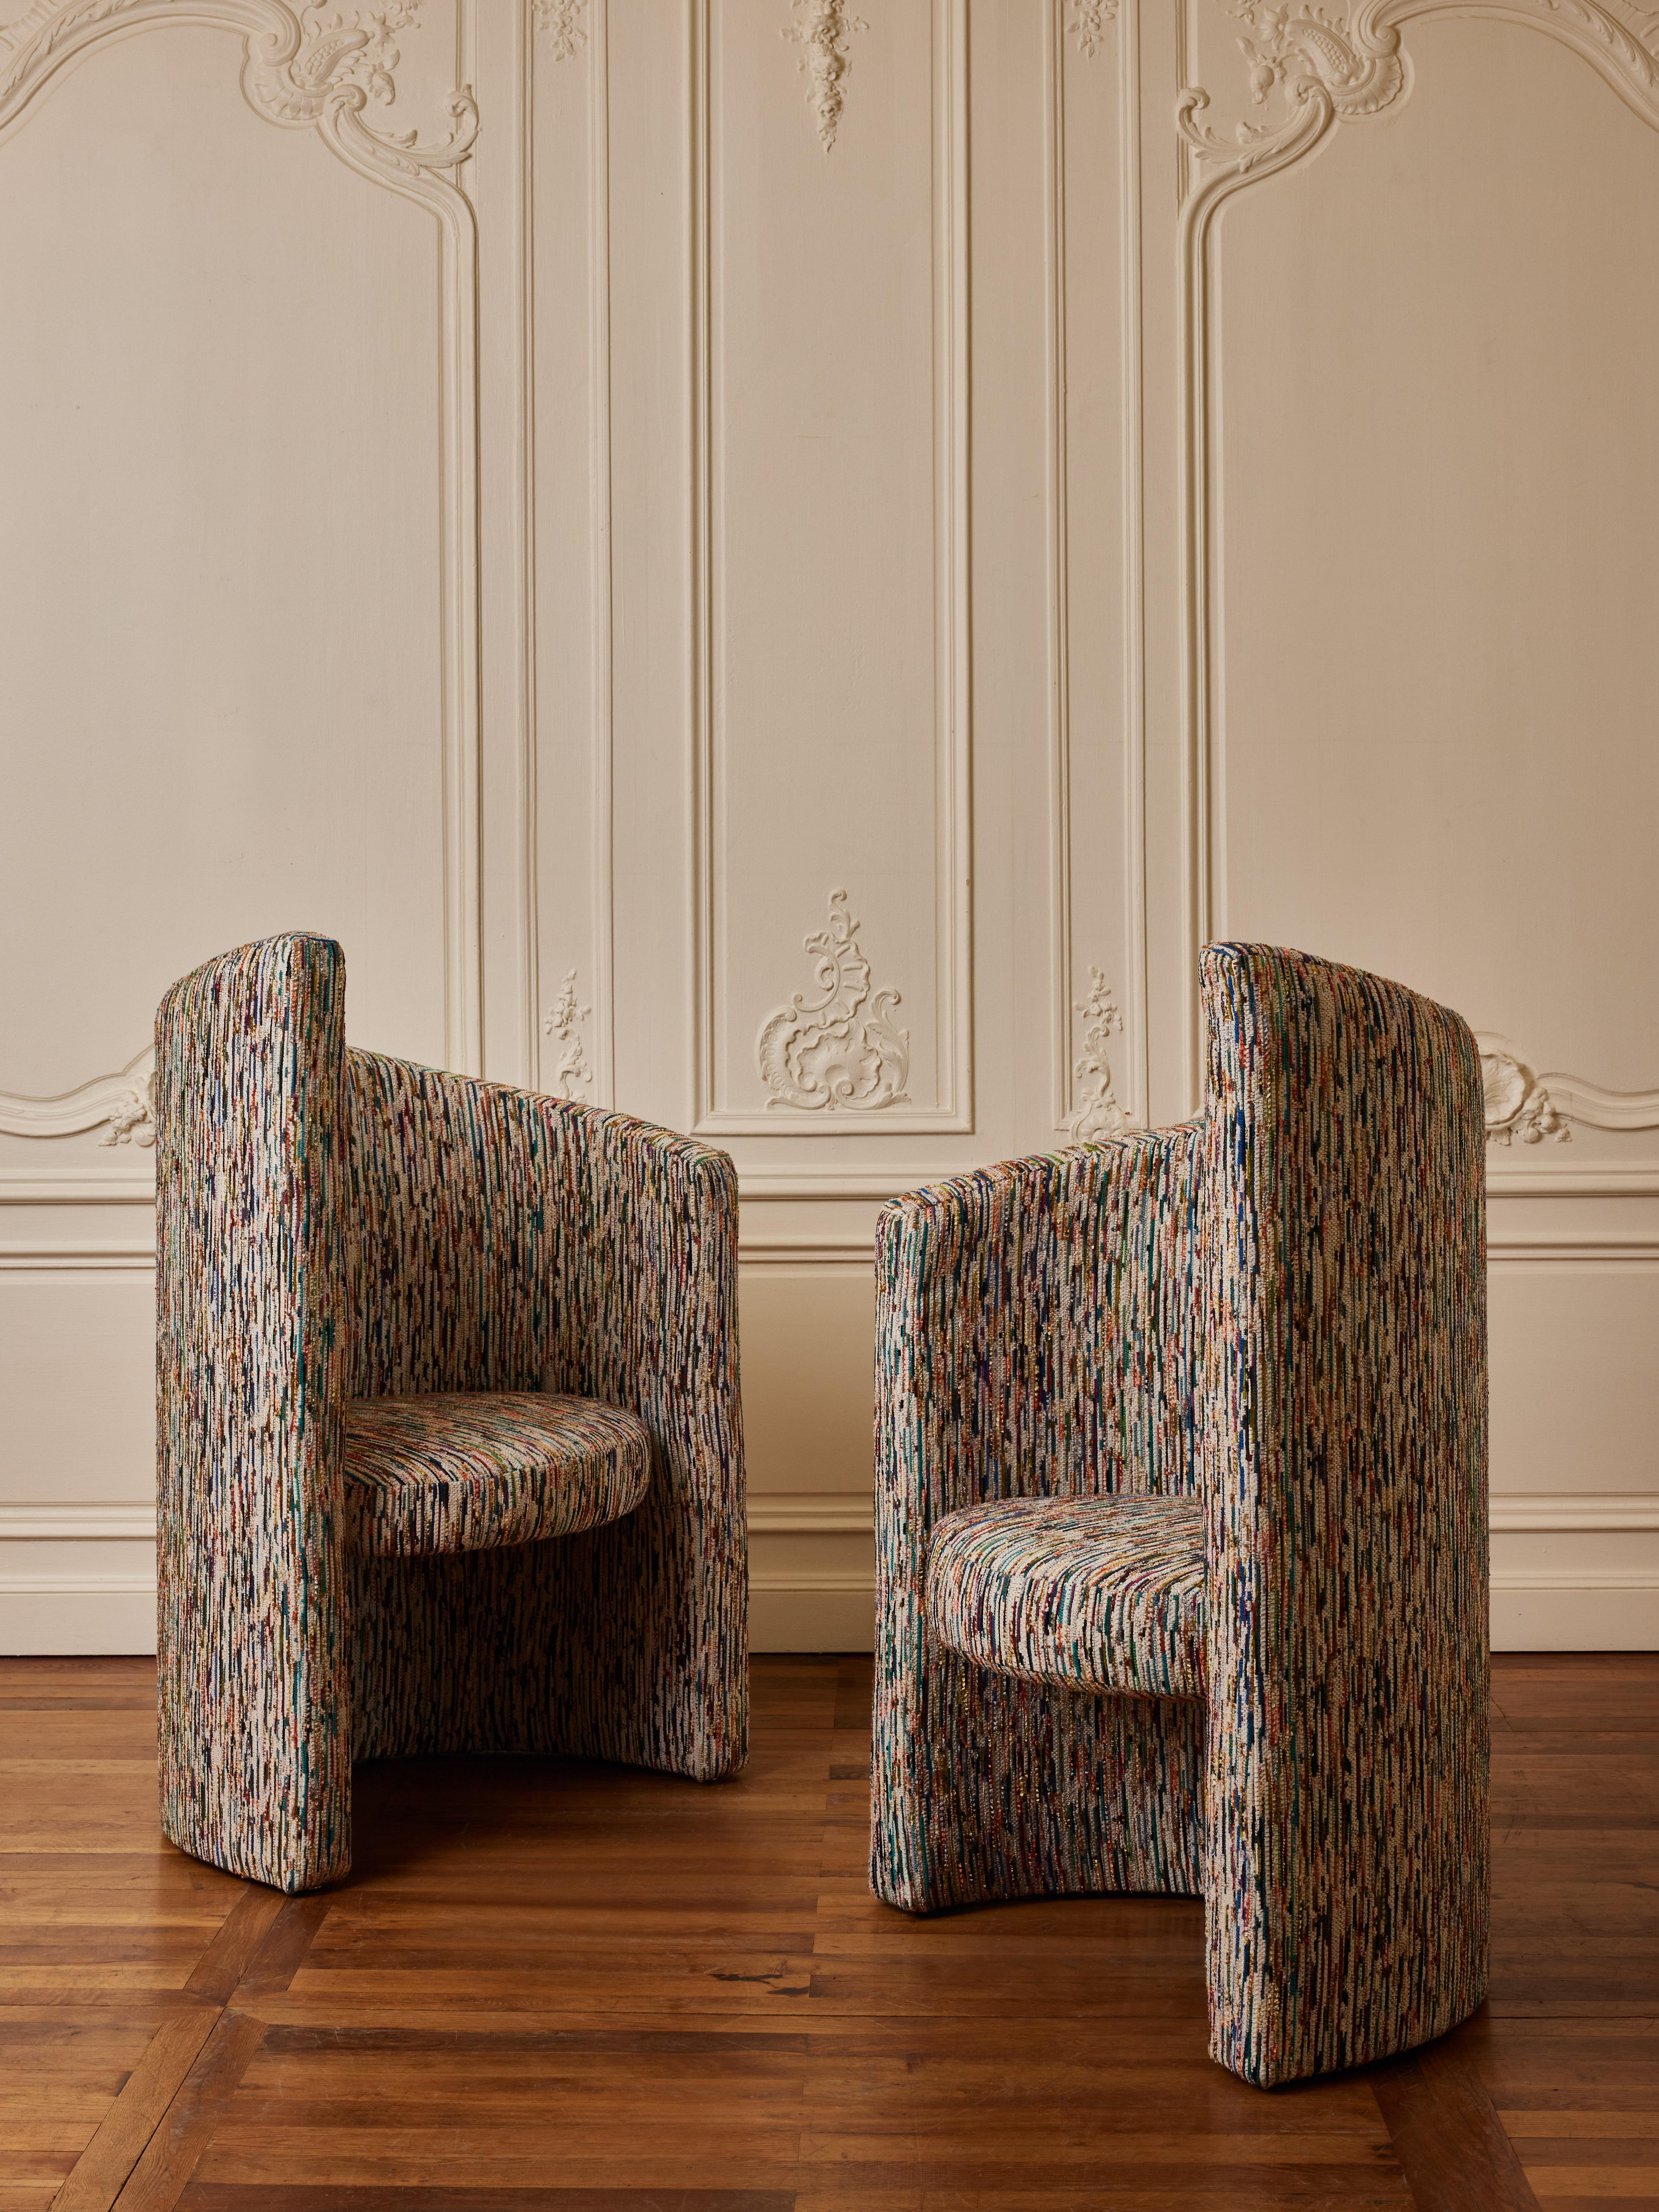 Pair of armchairs upholstered with a fabric by Missoni.
Creation by Studio Glustin.
France, 2023